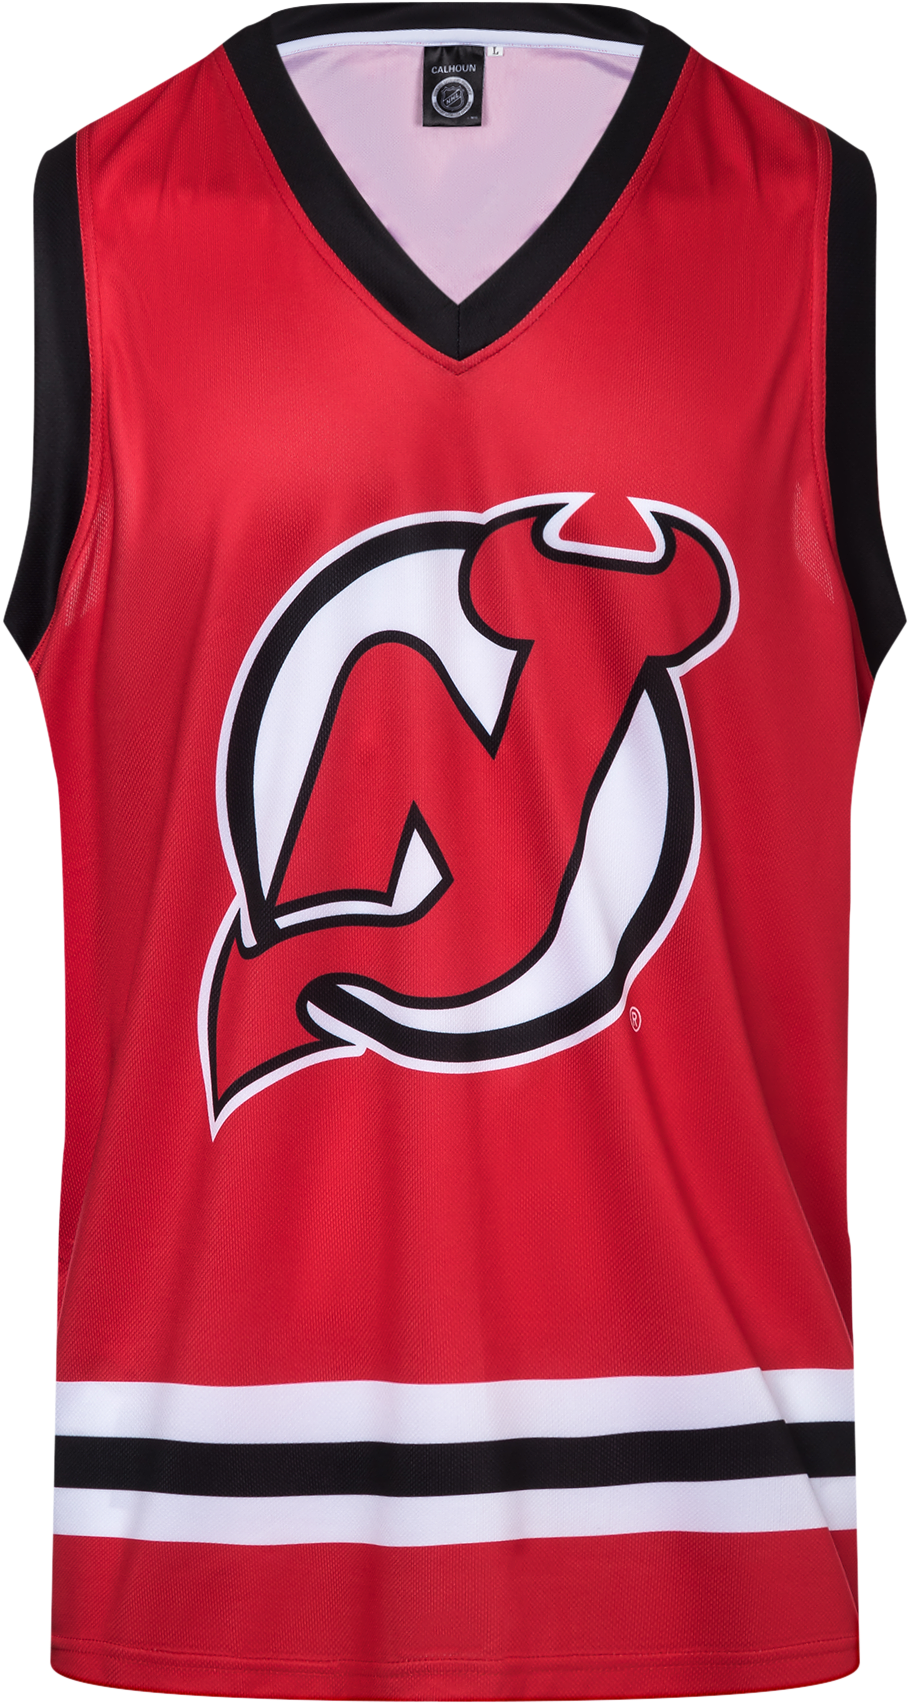 New Jersey Devils Hockey Jersey PNG